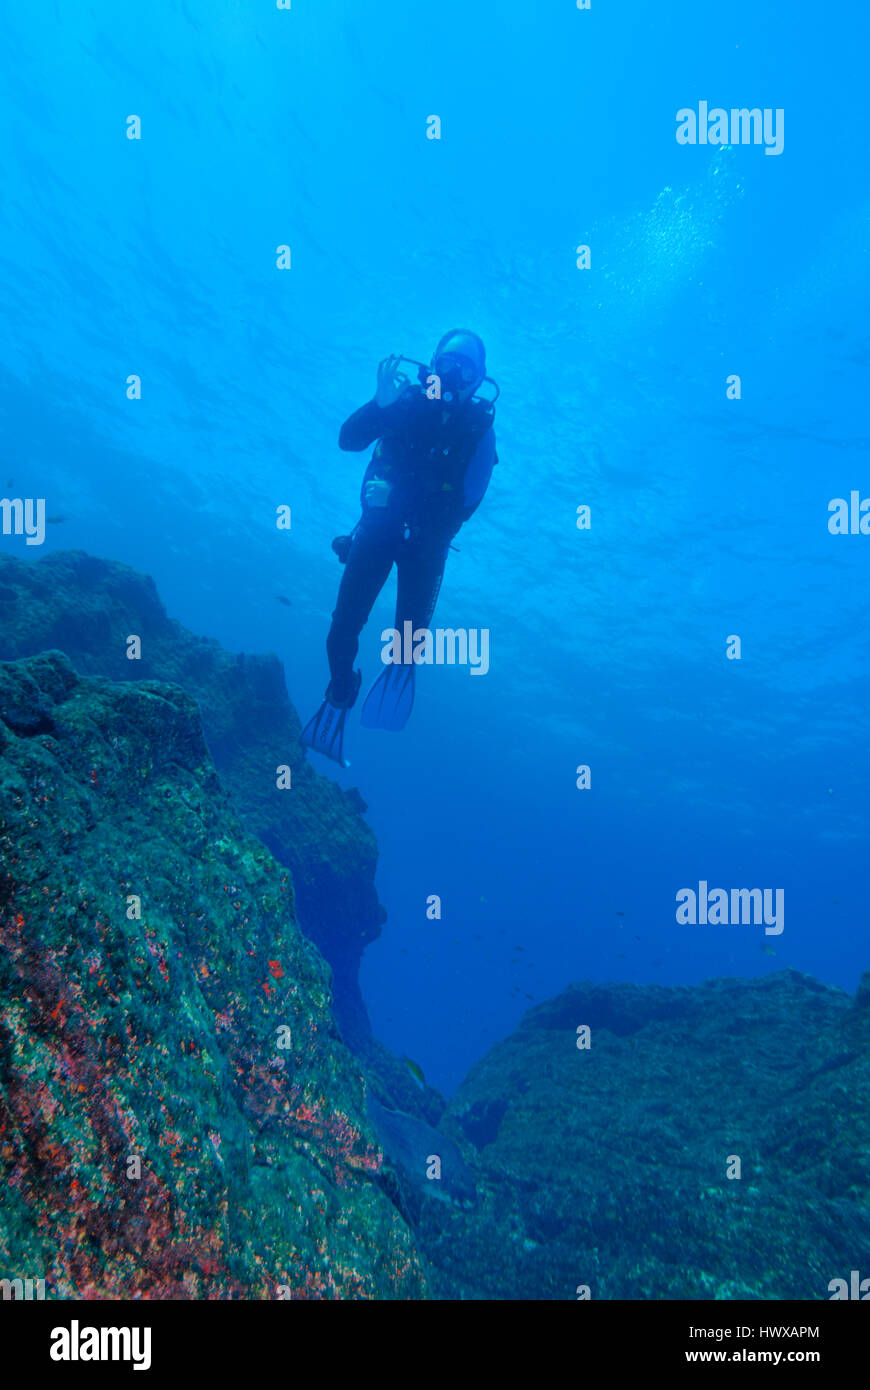 Scuba diver hanging midwater above rocky seabed Stock Photo